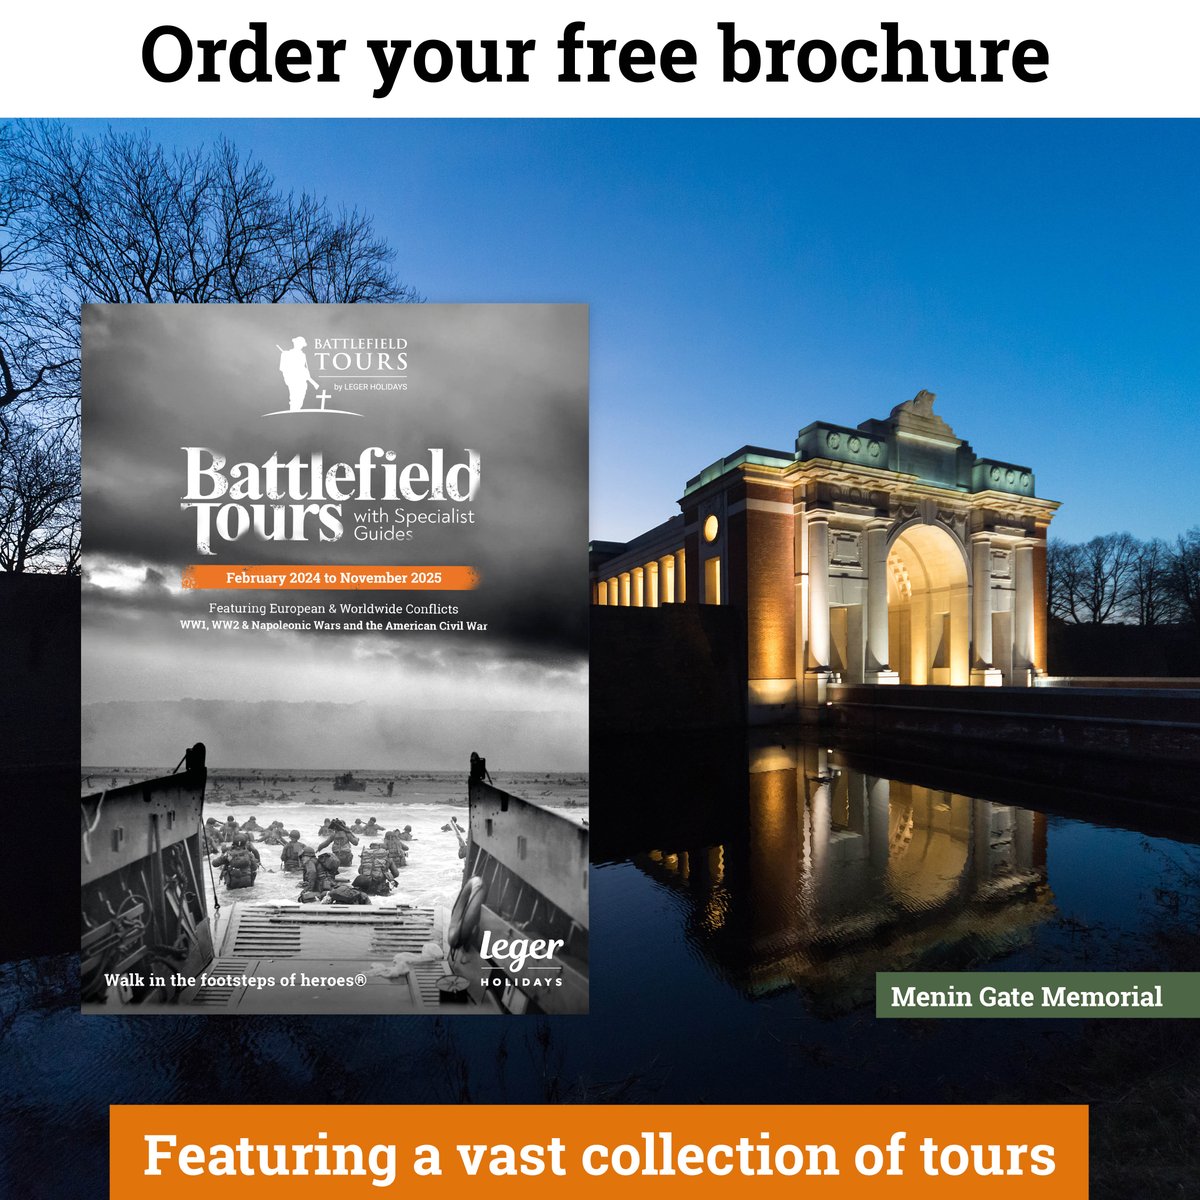 Featuring European and Worldwide conflicts, request our latest brochure and browse our full collection of Battlefield Tours at your leisure. Accompanied by a Specialist Guide, each tour offers an informative and rewarding journey – book today >> ow.ly/sT6L50Rcltb